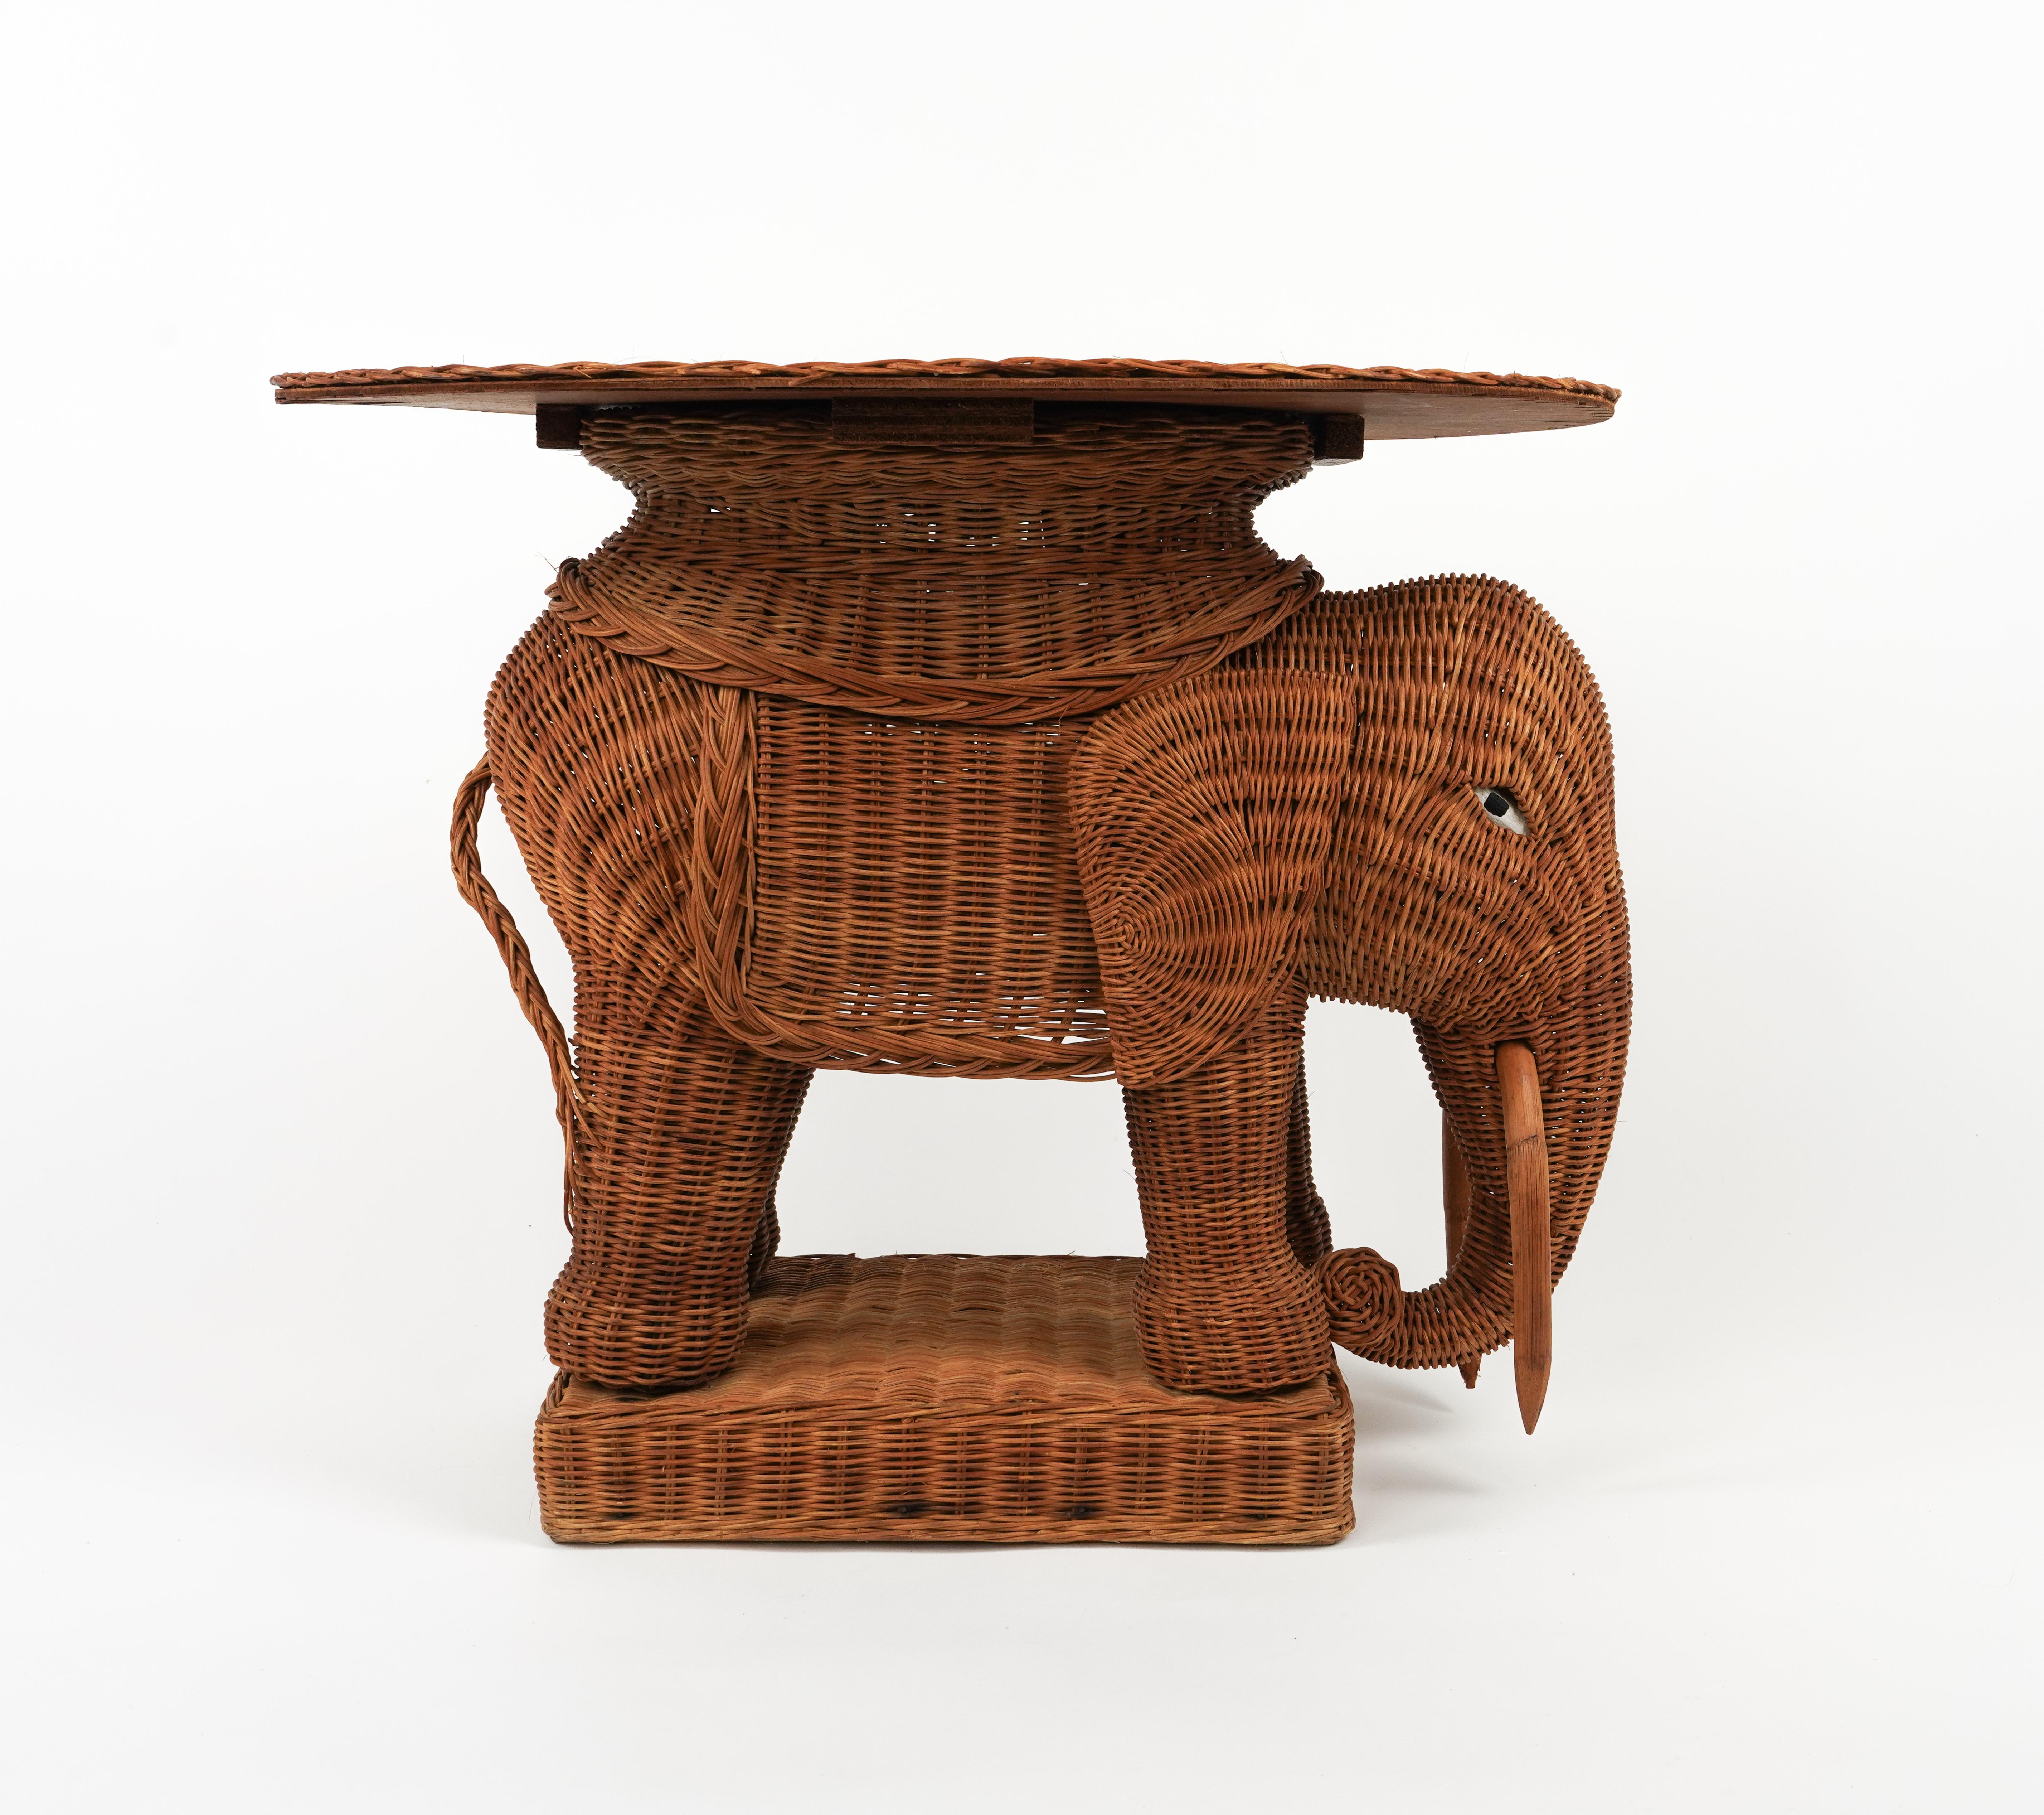 Rattan and Wicker Elephant Side Coffee Table Vivai Del Sud Style, Italy, 1960s For Sale 6